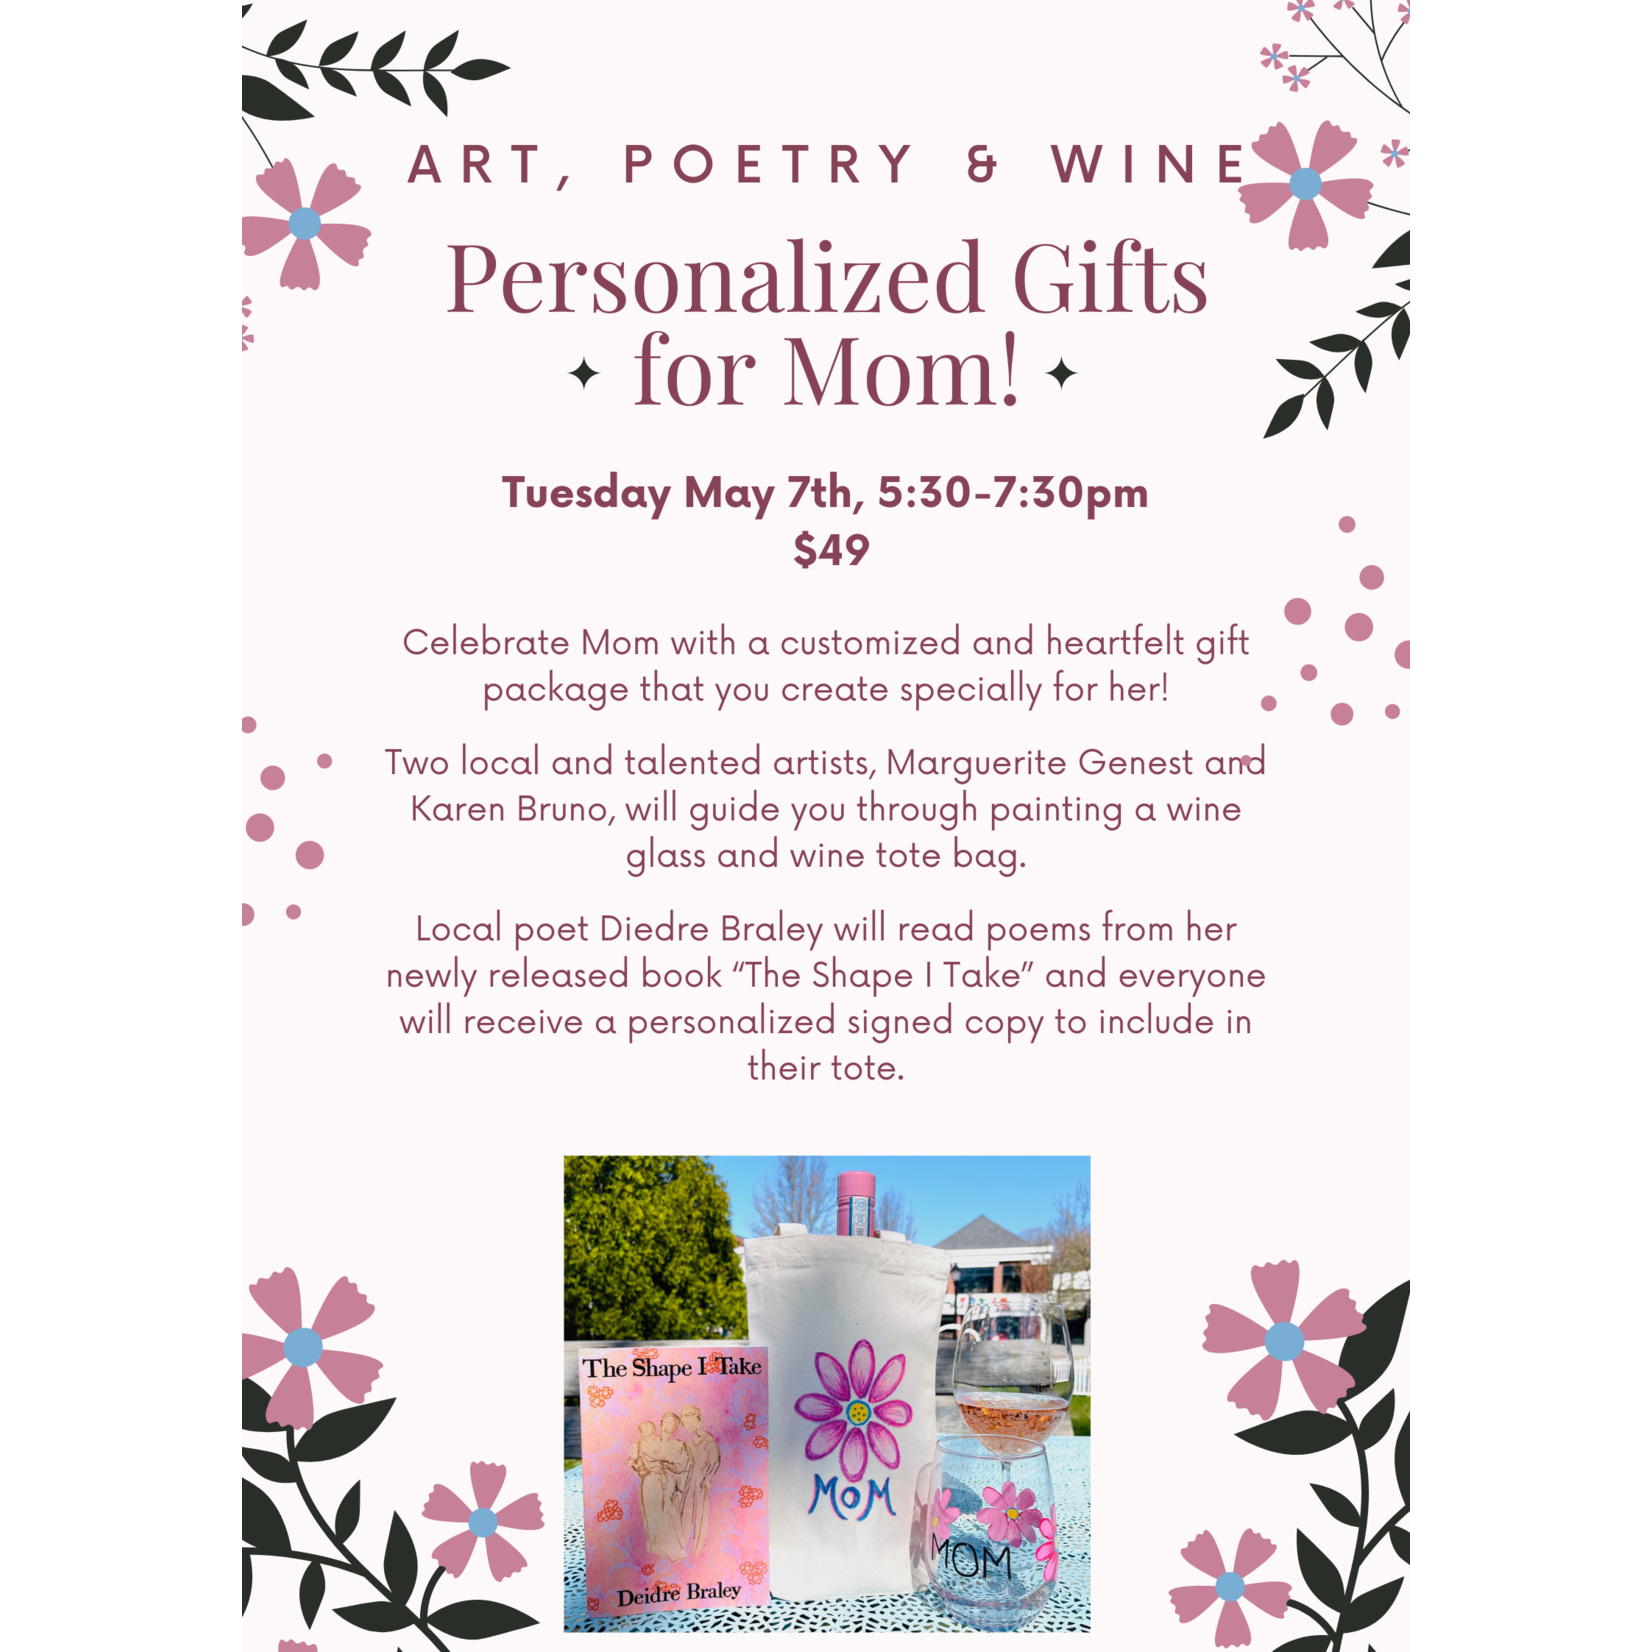 Art, Poetry & Wine: Personalized Gifts for Mom, Tuesday May 7th, 5:30-7:30